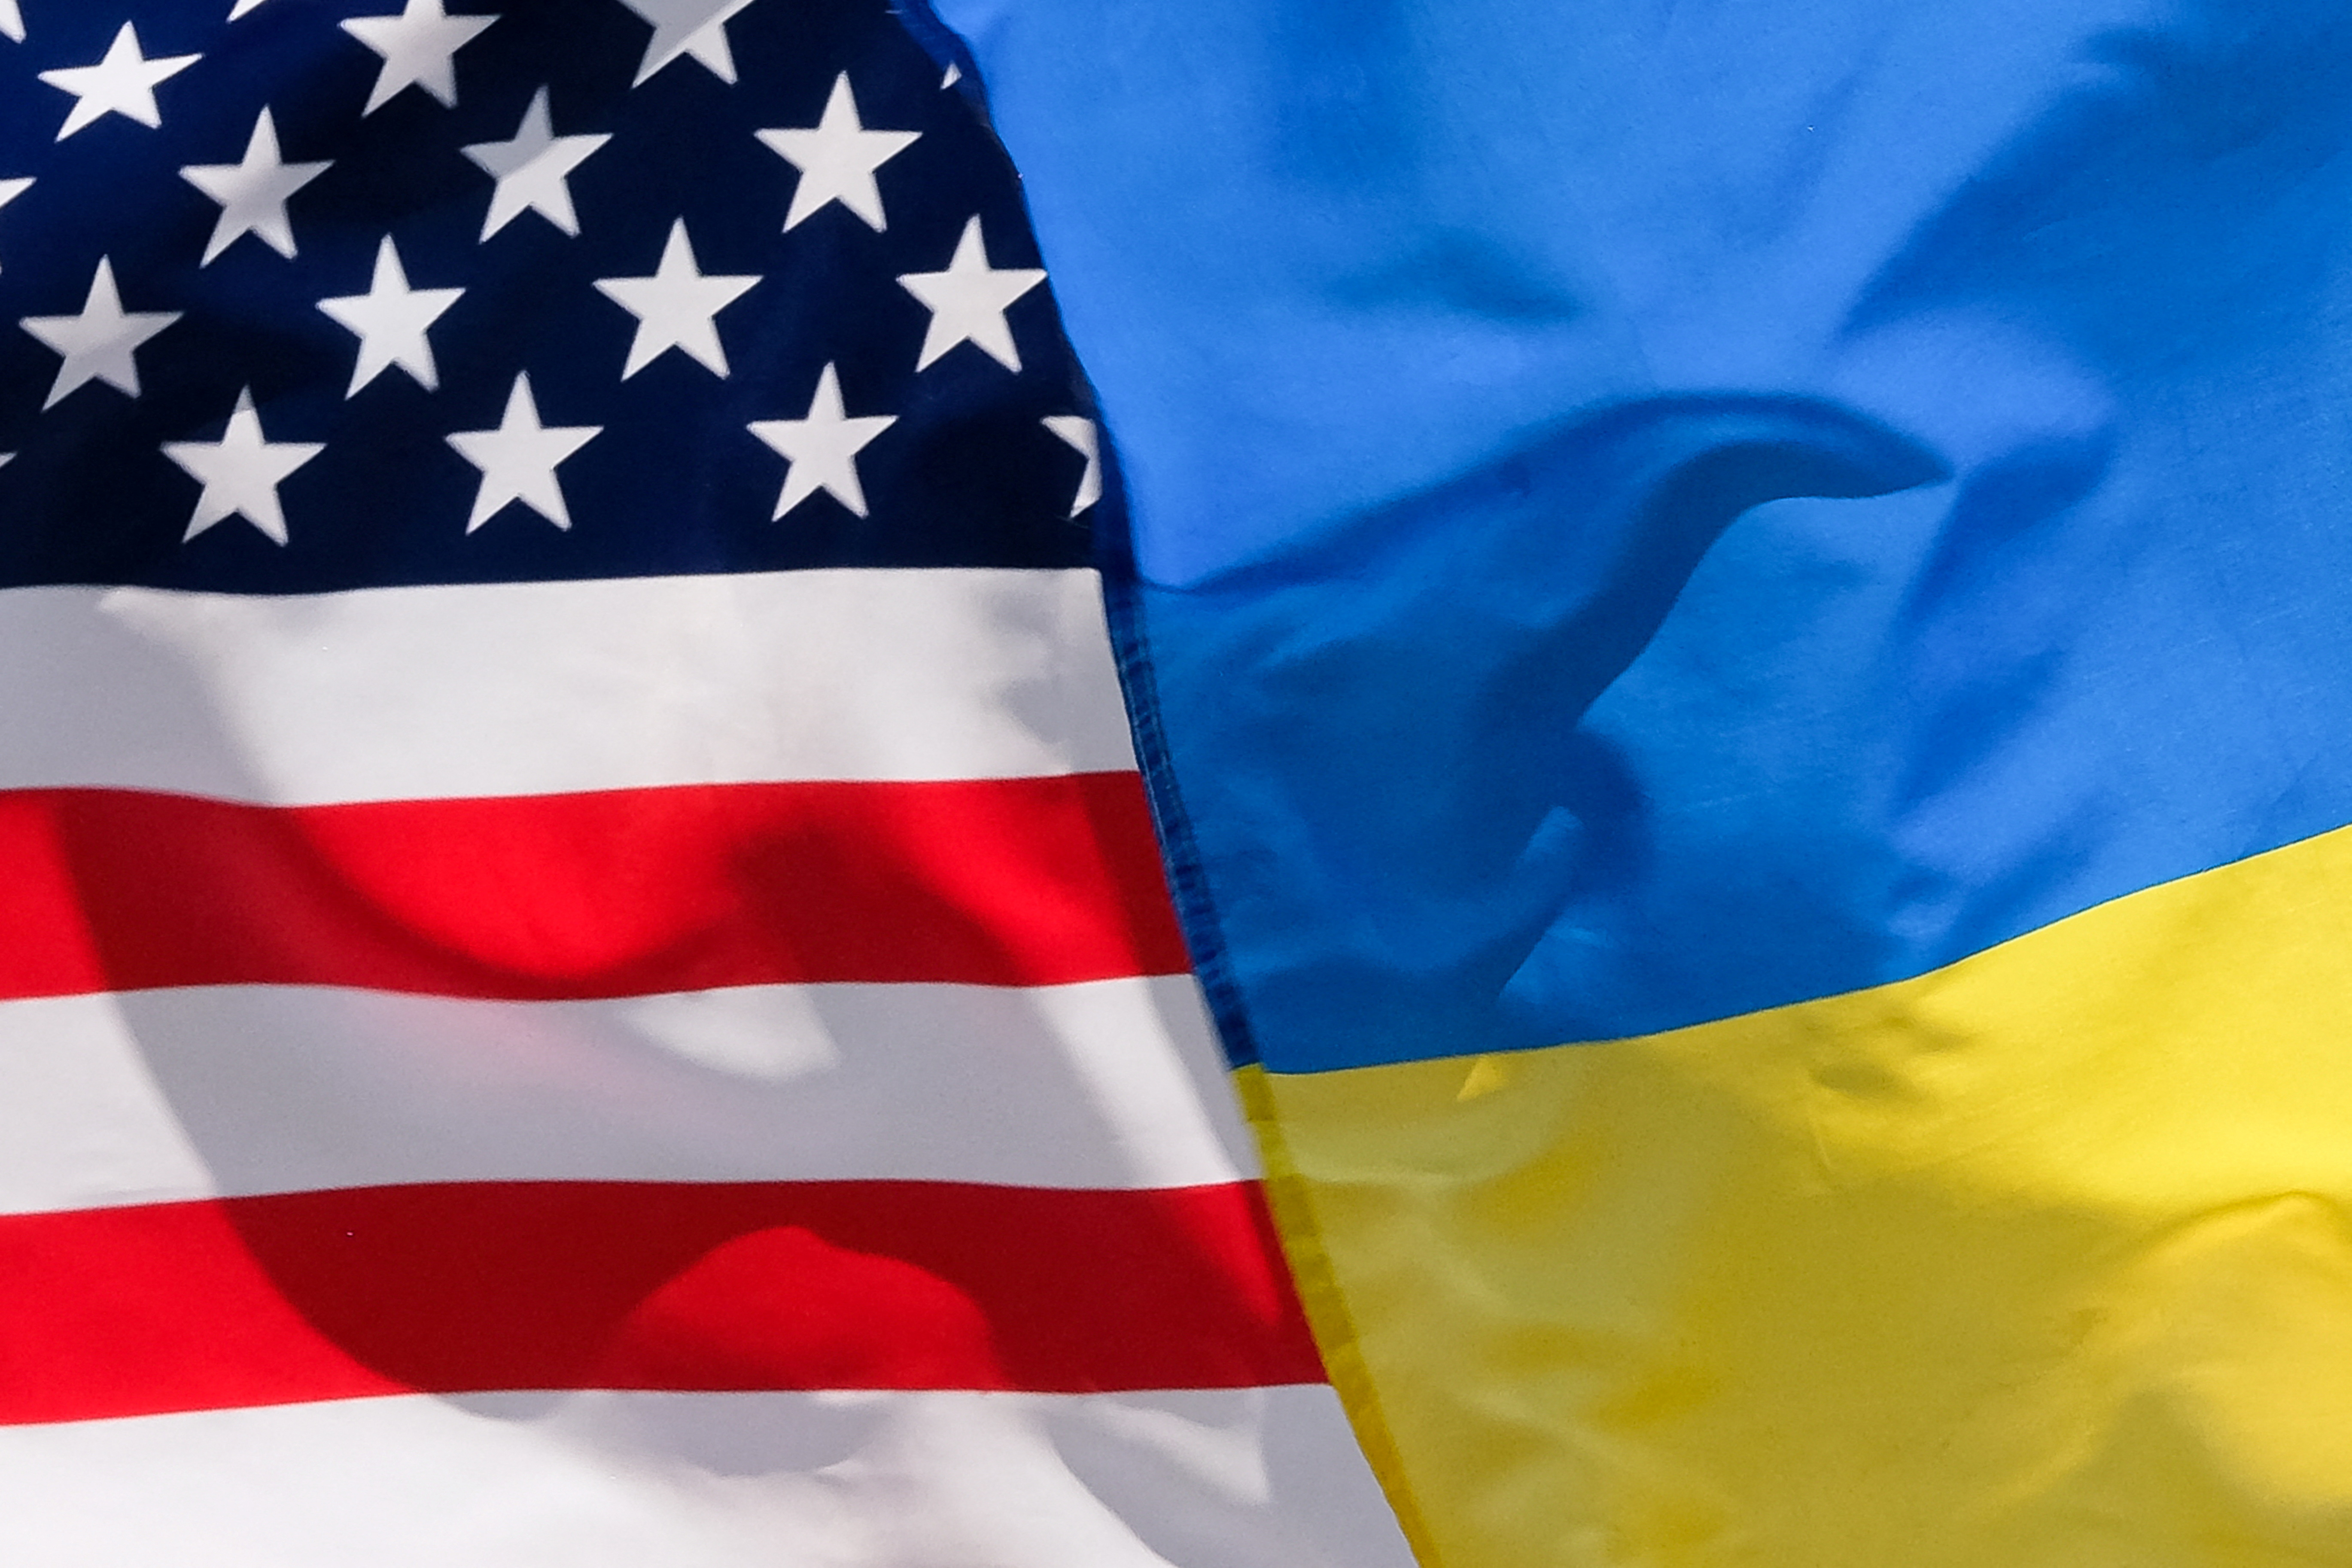 The American and Ukrainian flags wave next to each other.